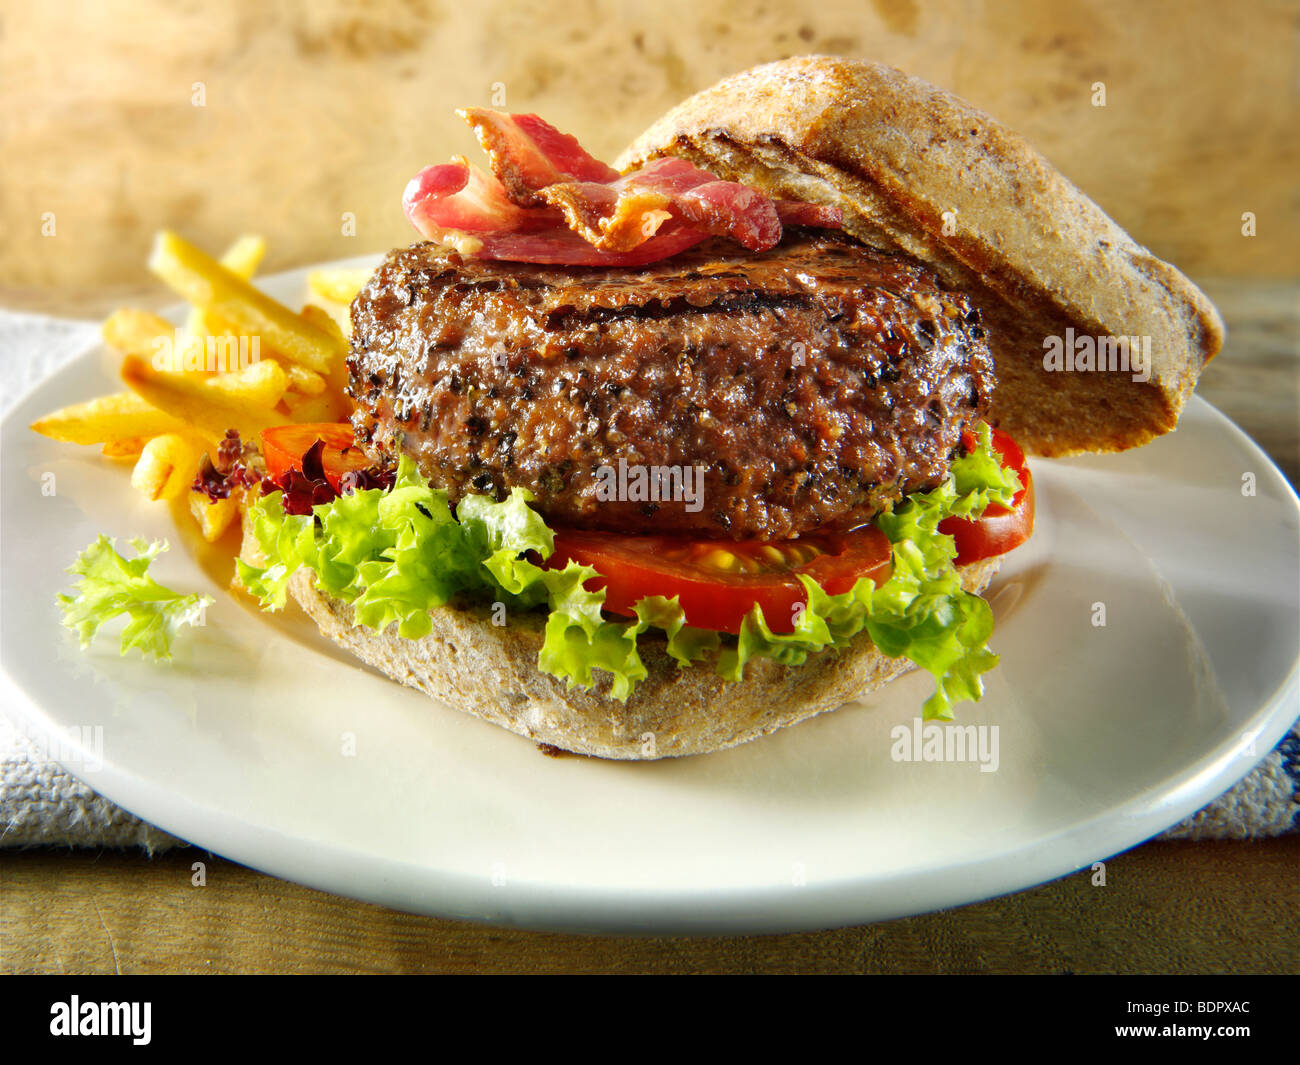 Peppered beef burger with chips Stock Photo